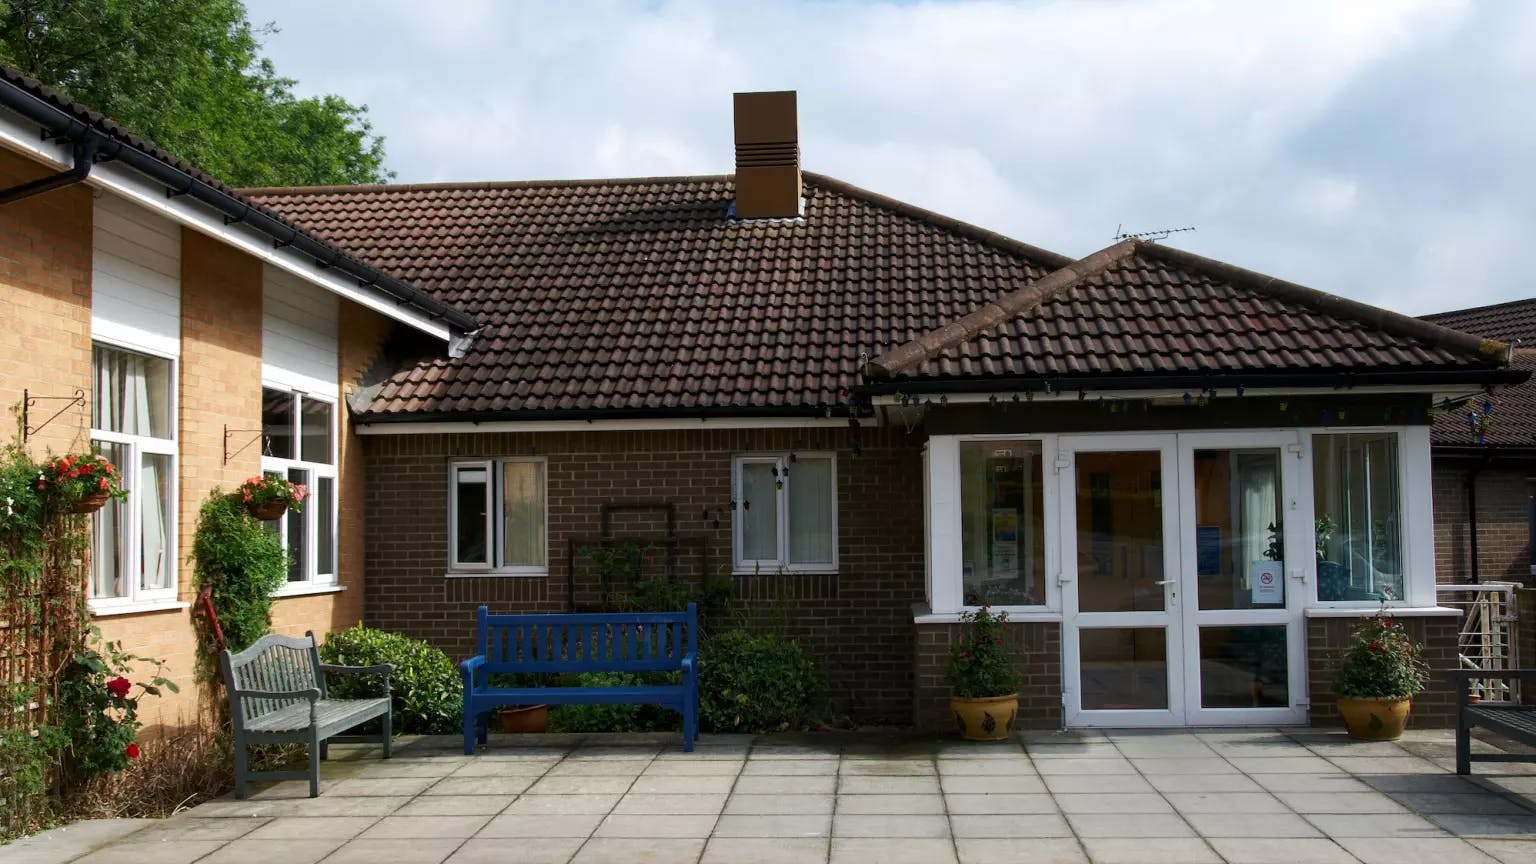 Exterior of Pinewood Lodge care home in Watford, Hertfordshire